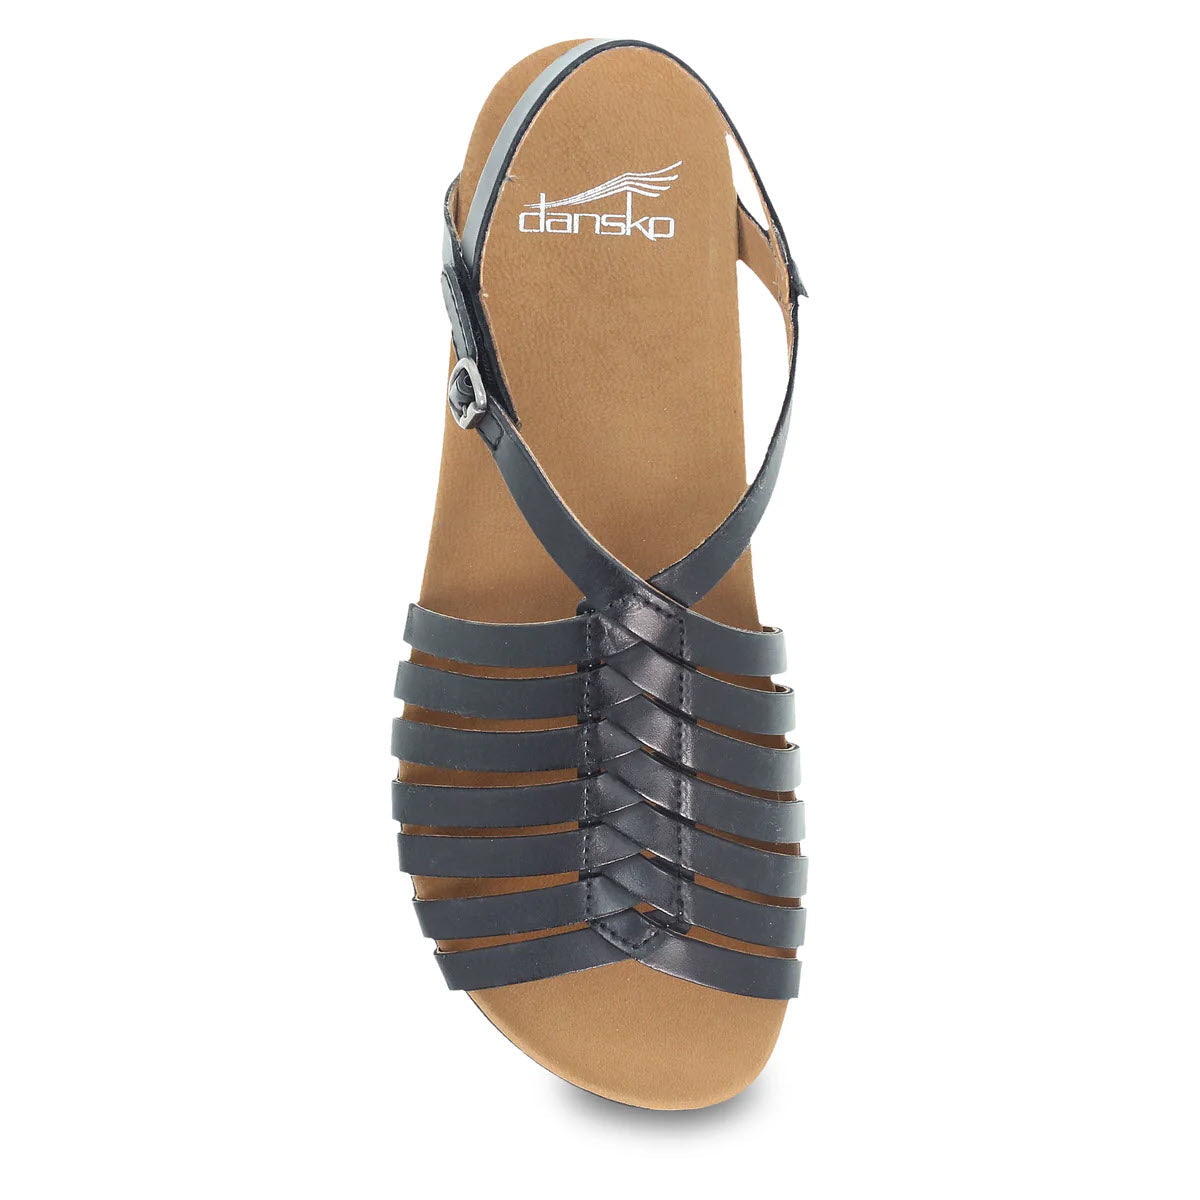 A single Dansko Jennifer Black - Women&#39;s sandal with a fashionable strap design and an ankle strap, displayed against a white background.